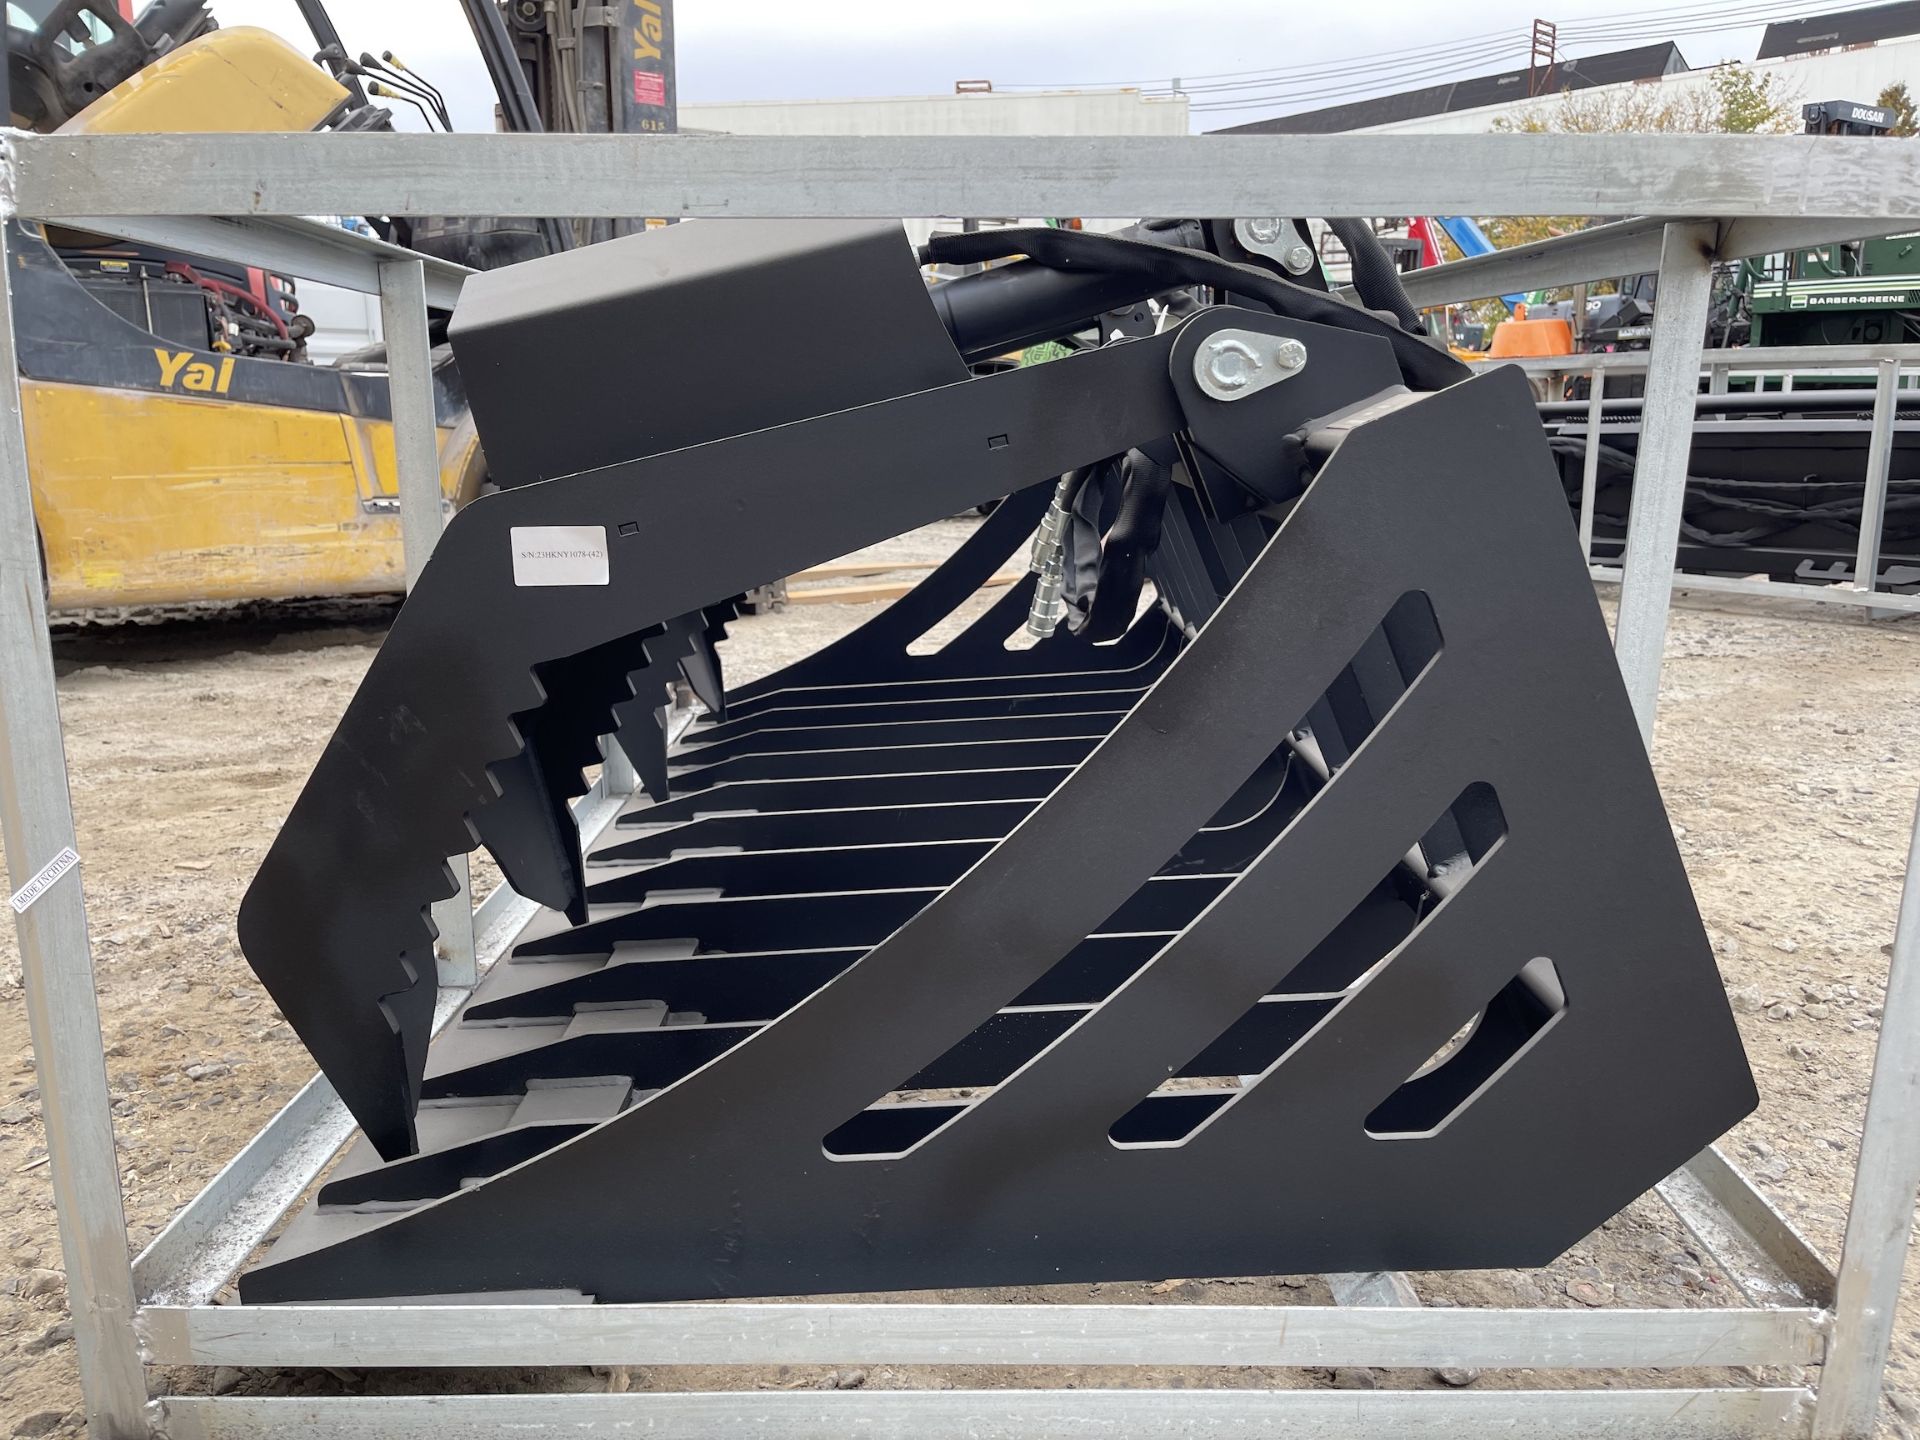 Brand New Greatbear 72" Rock Grapple Bucket Skid Steer Attachment (NY153) - Image 8 of 12